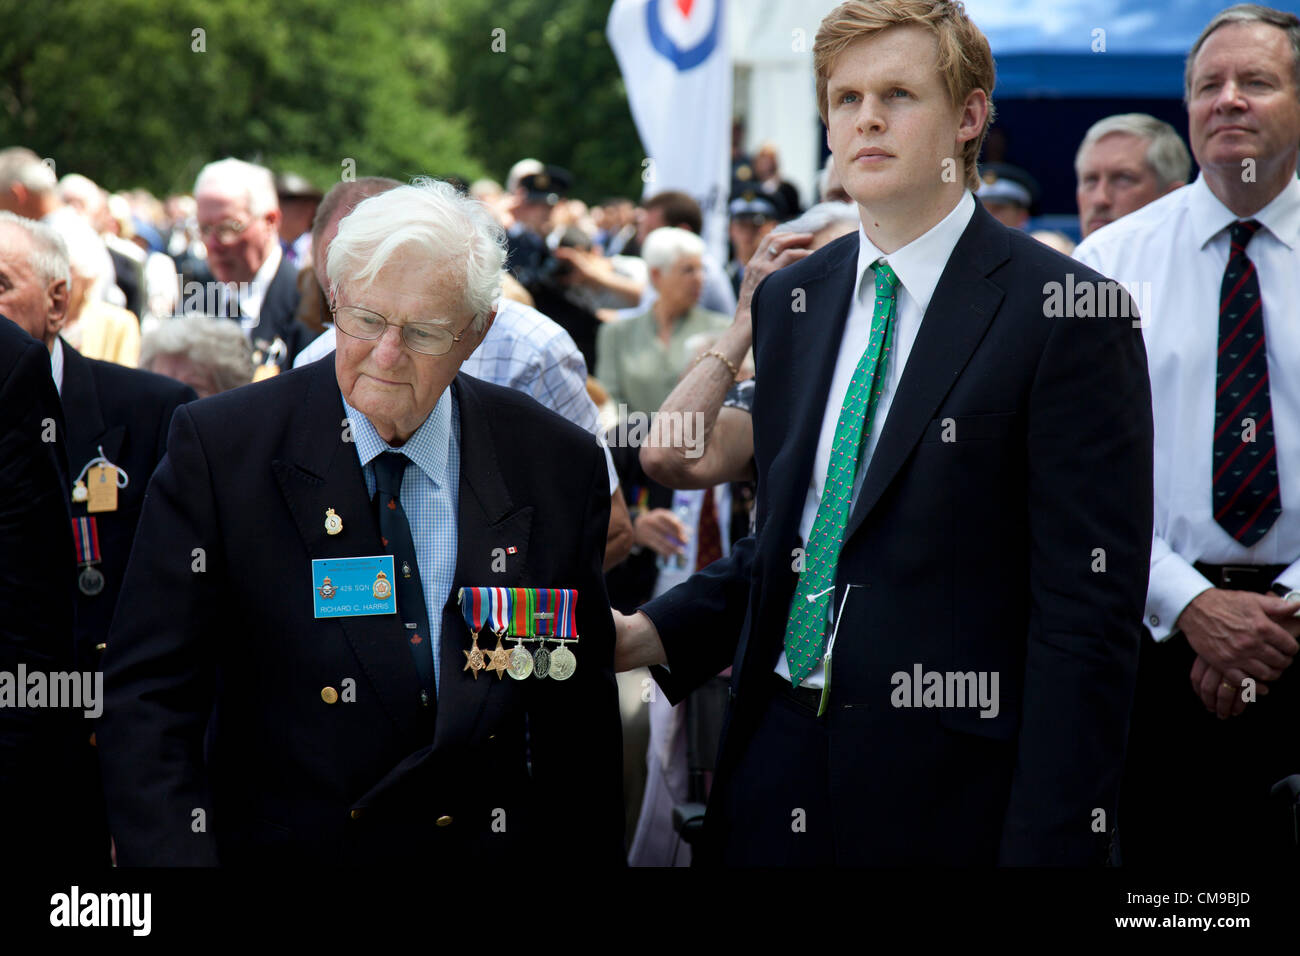 London, UK. 28/06/2012. Veterans and their families gather in Green park for a service to watch as the memorial to the 55,573 airmen of Bomber Command who died during World War II was unveiled. Some 6000 attended the ceremony.  Stock Photo